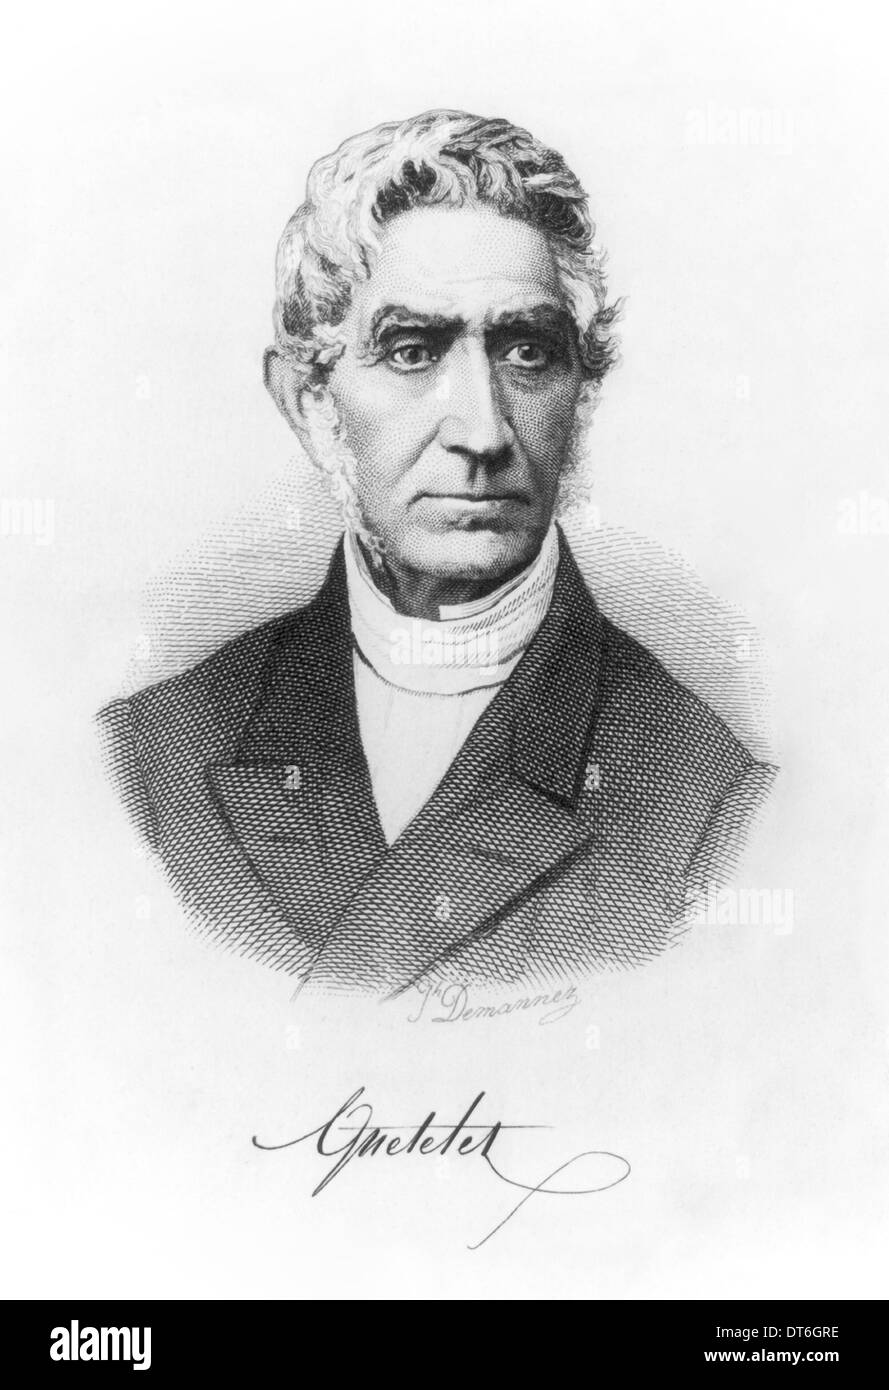 Adolphe Quetelet (1796-1874) Belgian mathematician, astronomer and statistician who published his Treatise on Man in 1835. See more information below. Stock Photo